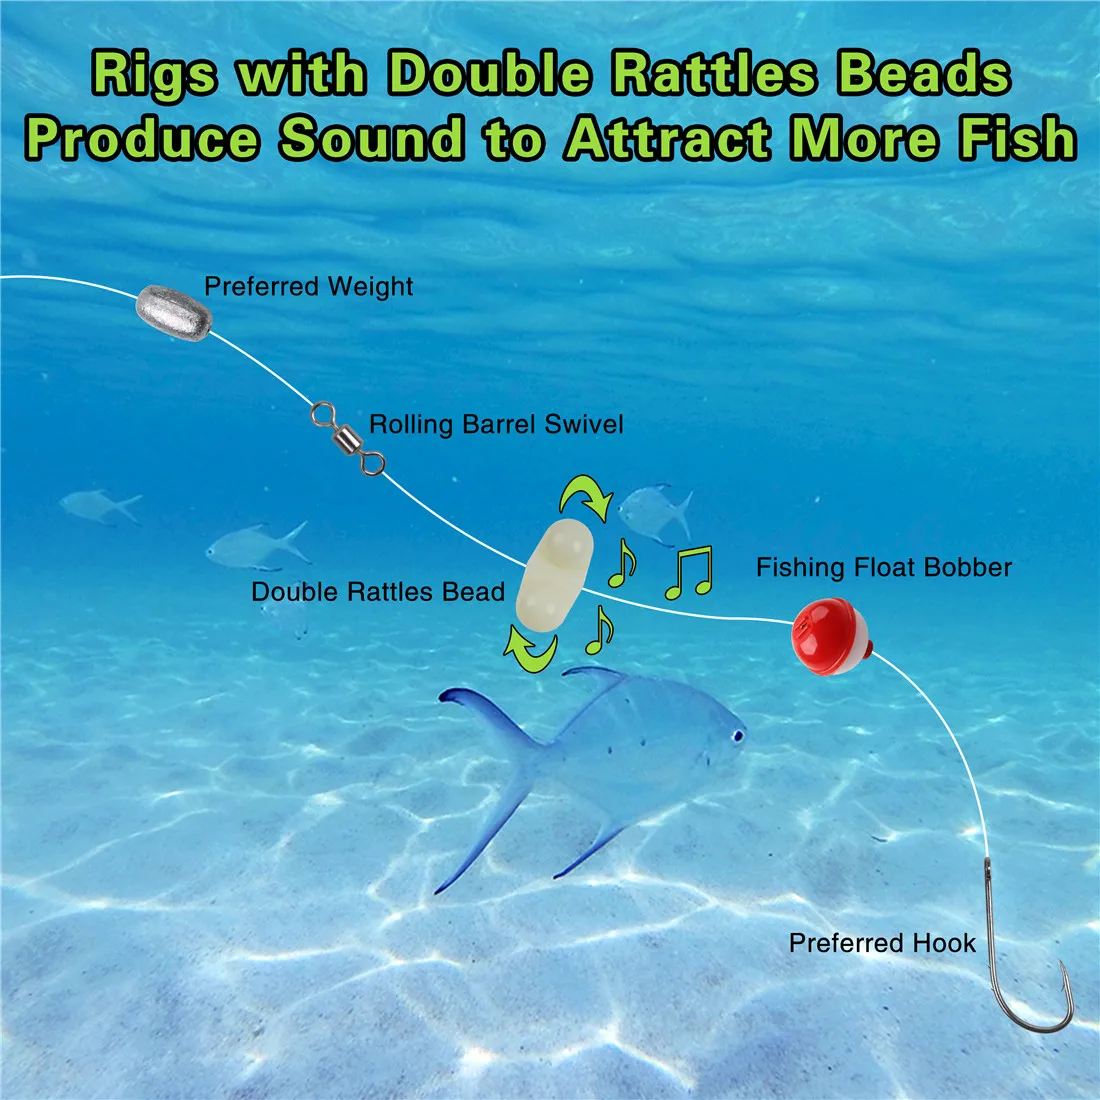 https://ae01.alicdn.com/kf/S87f3b979b91b49228e53645fcd4bd819J/15Pcs-Fishing-rattles-for-catfish-Terminal-Tackle-Fishing-Line-Rattles-Double-Rattle-Sea-Fishing-Attractor-Bell.jpg